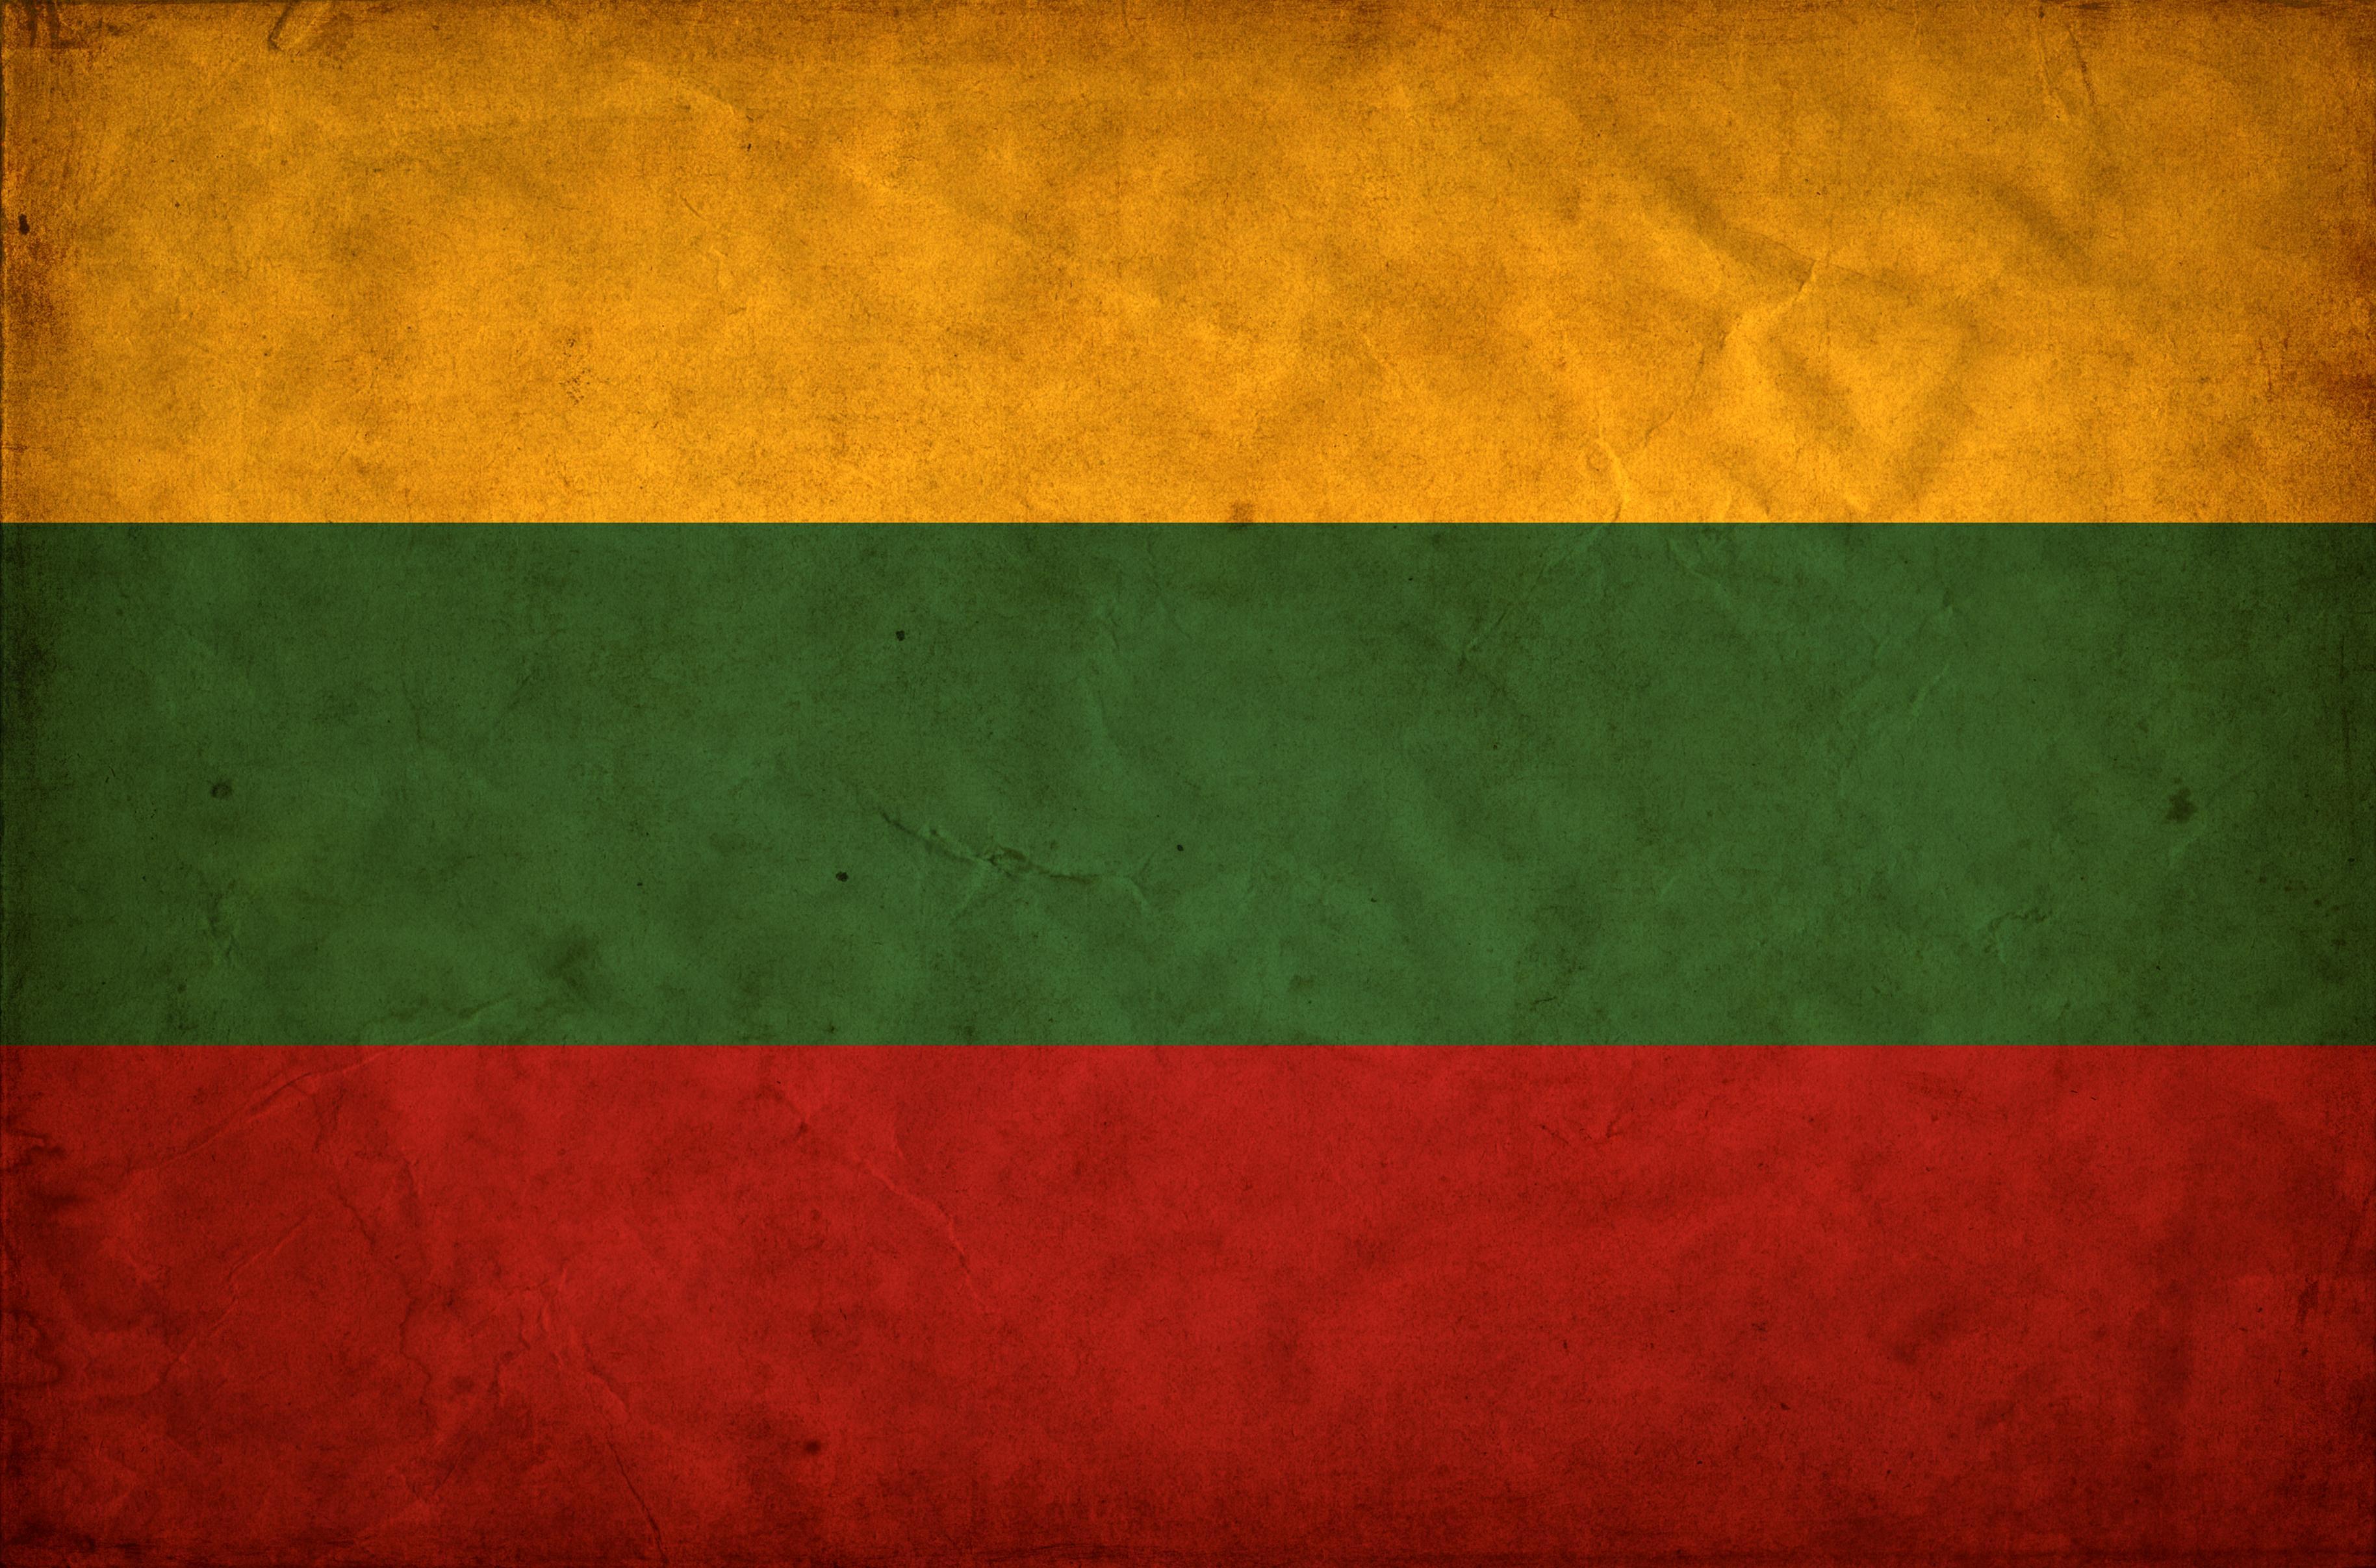 Free photo: Lithuania Grunge Flag, Picture, Proud